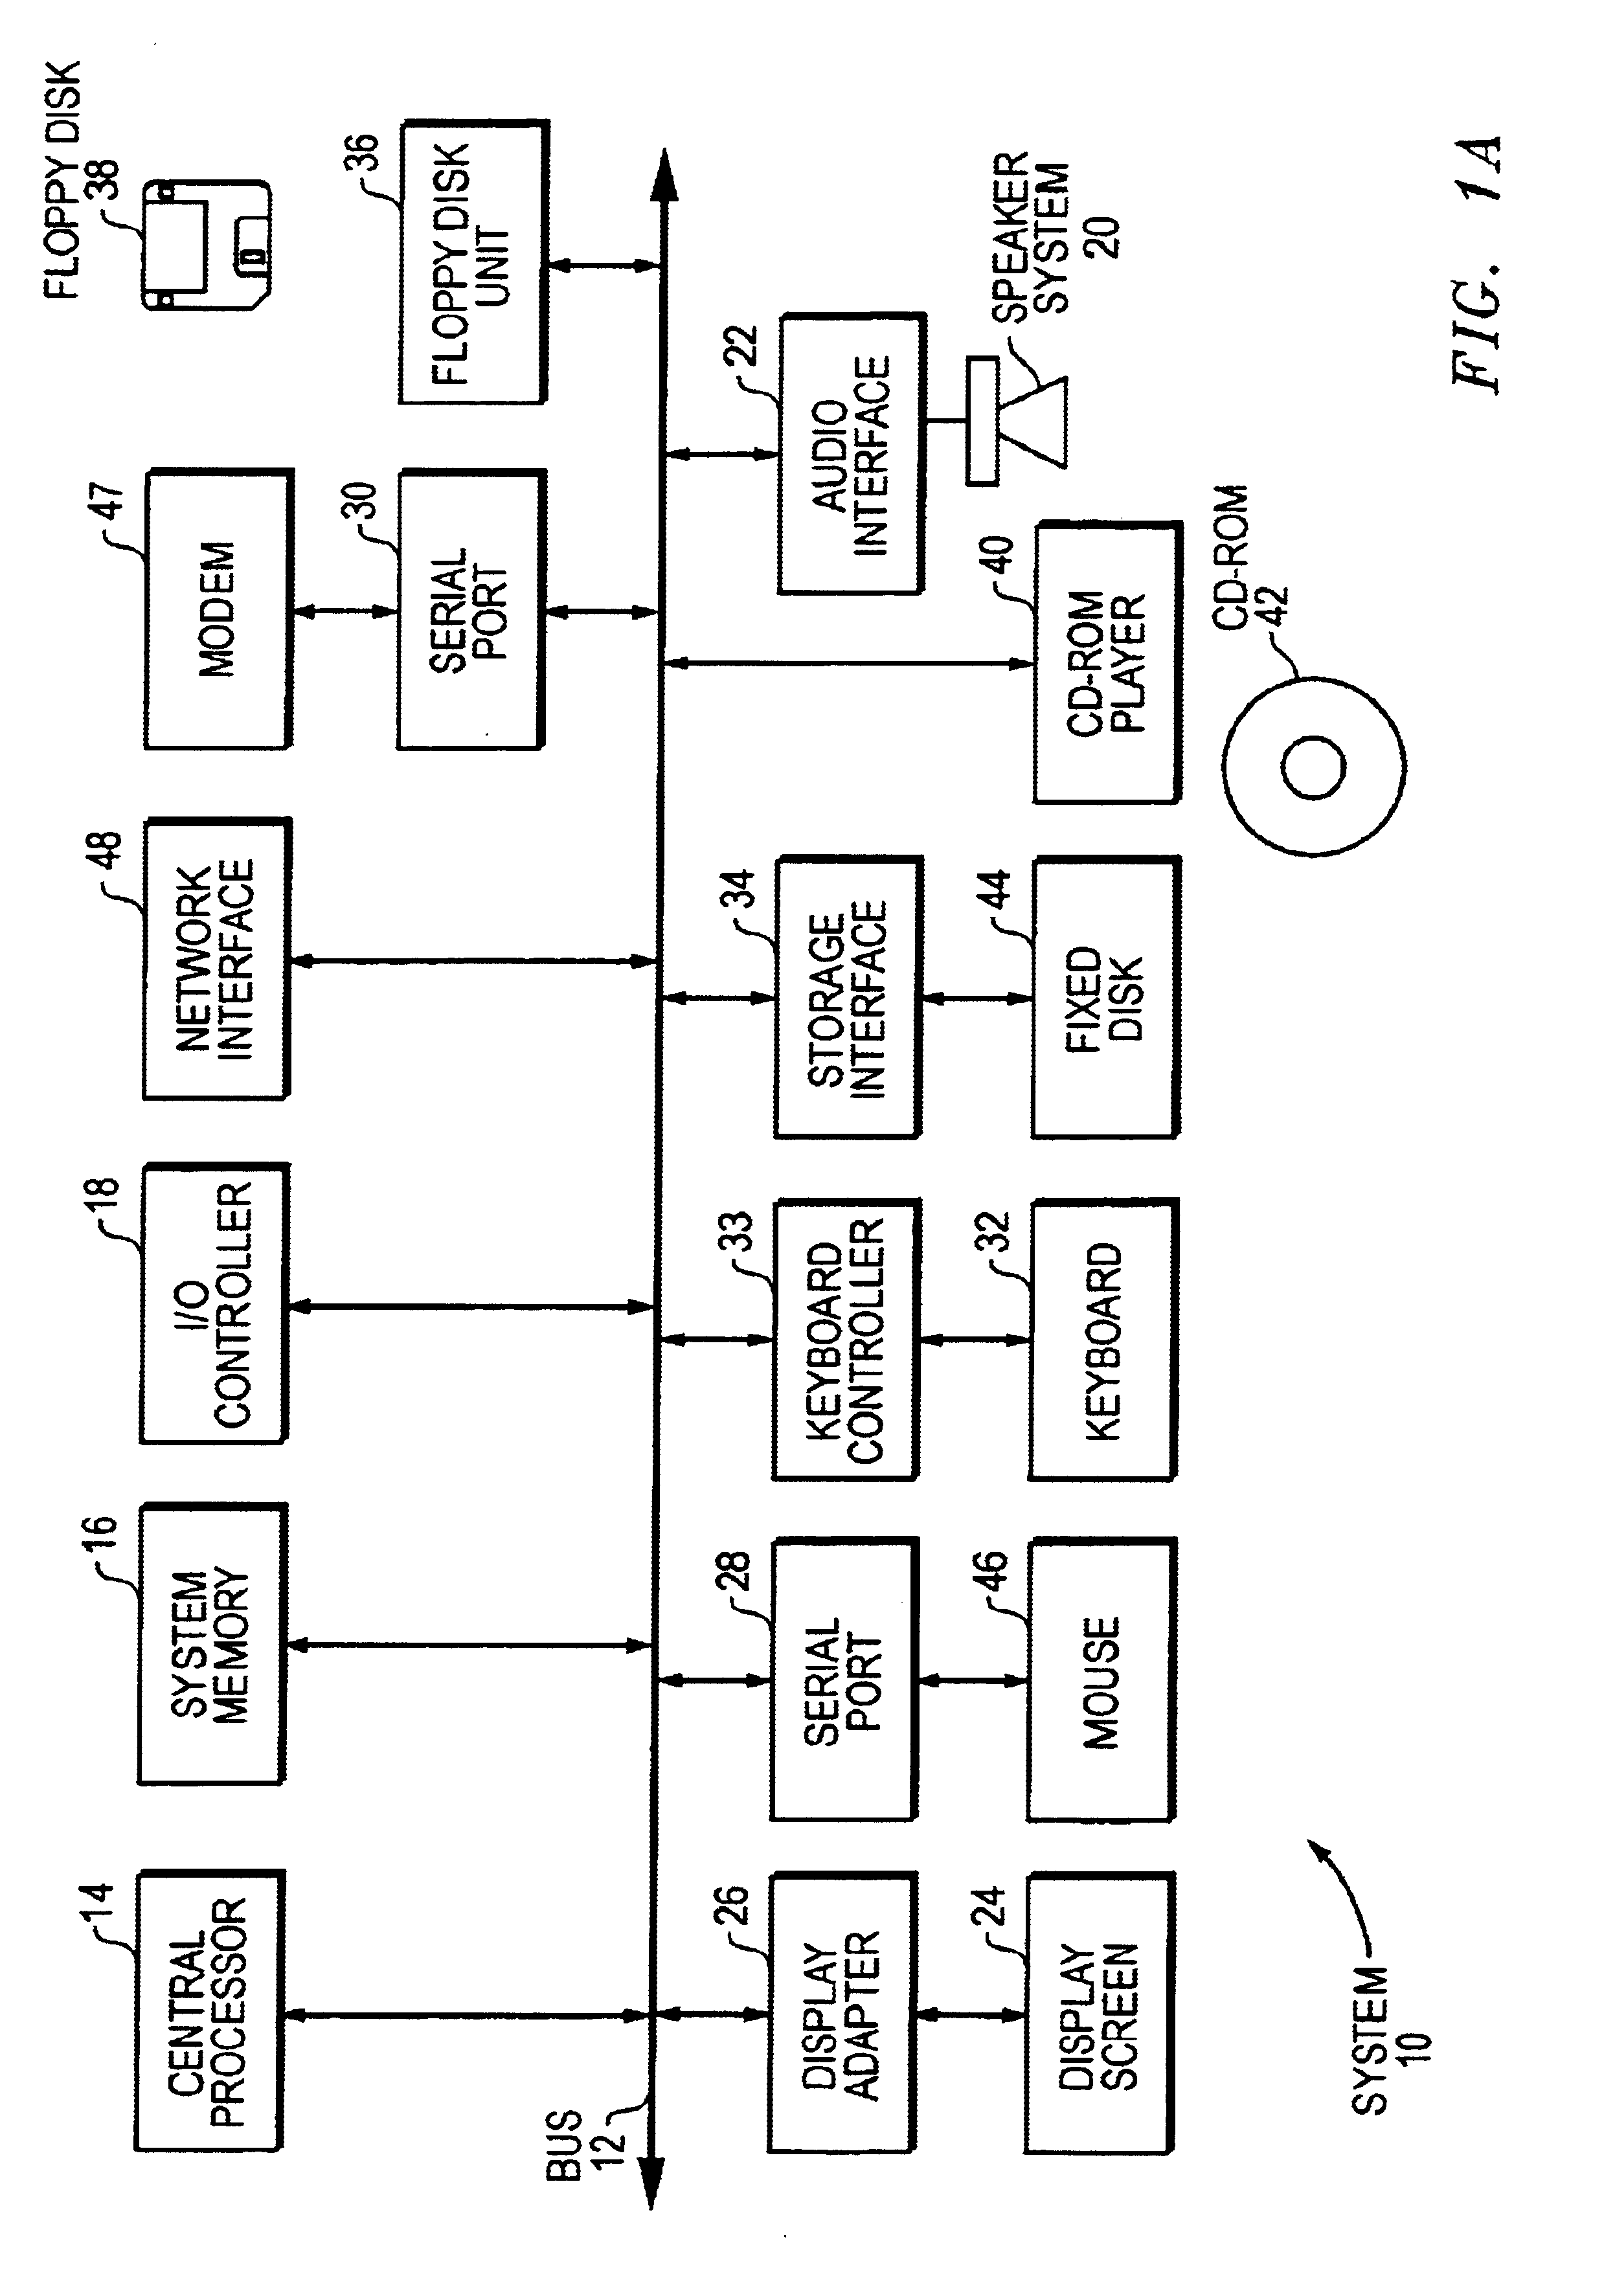 Method and apparatus for estimating delay and jitter between many network routers using measurements between a preferred set of routers